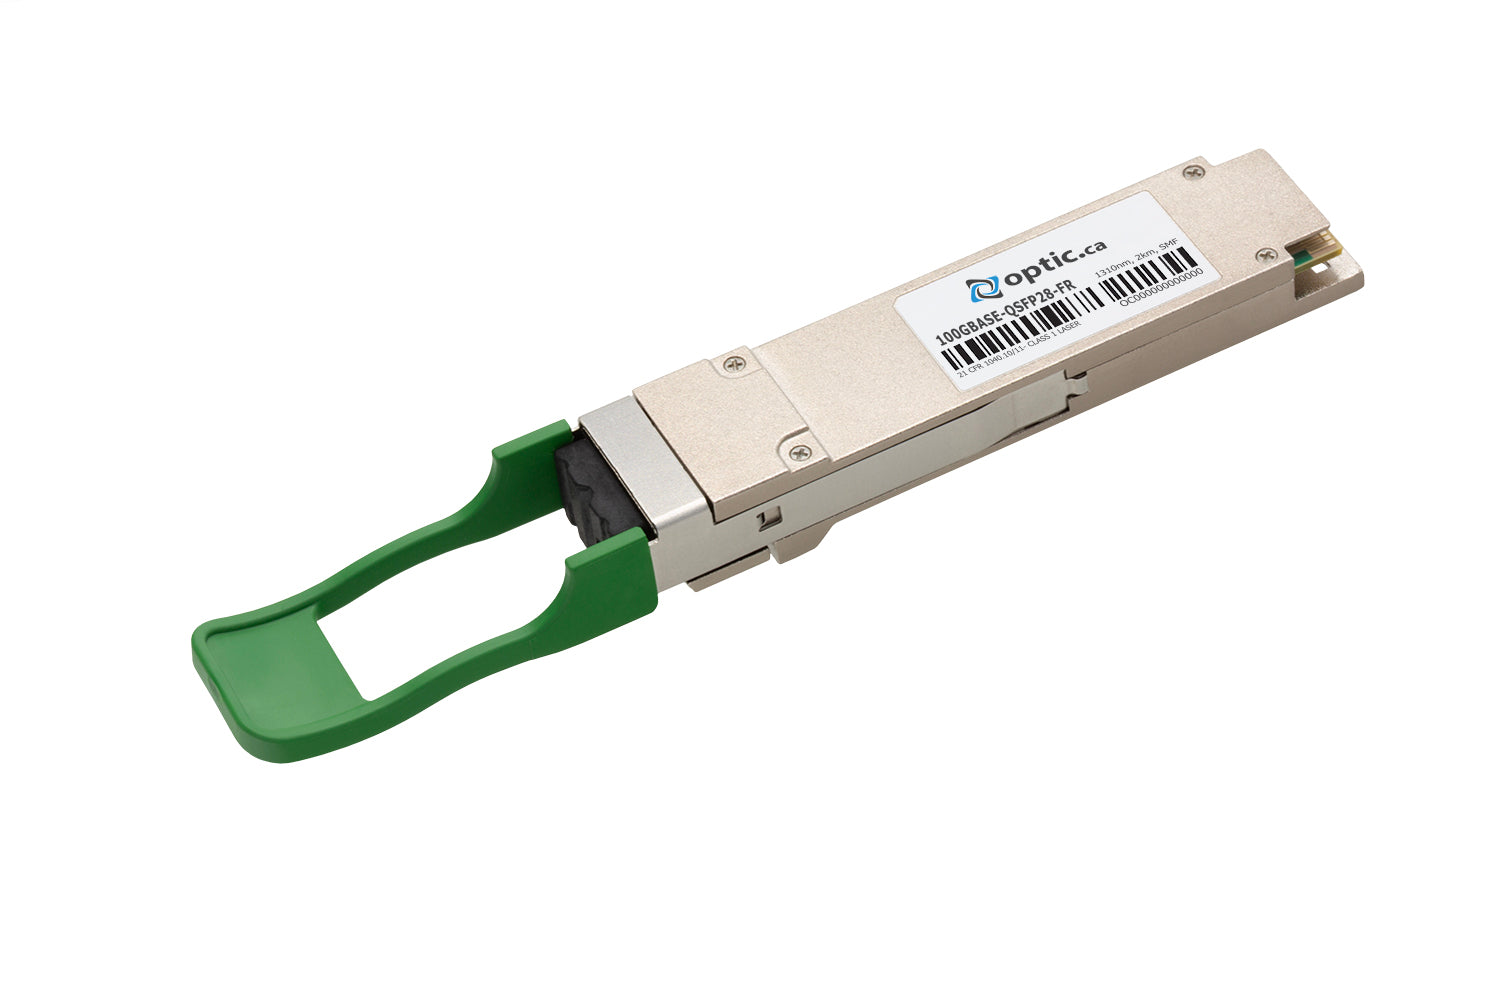 OPTIC.CA - 100GBASE-FR1 QSFP28 - 100G-FR-QSFP2KM-OC - EXTREME NETWORKS COMPATIBLE